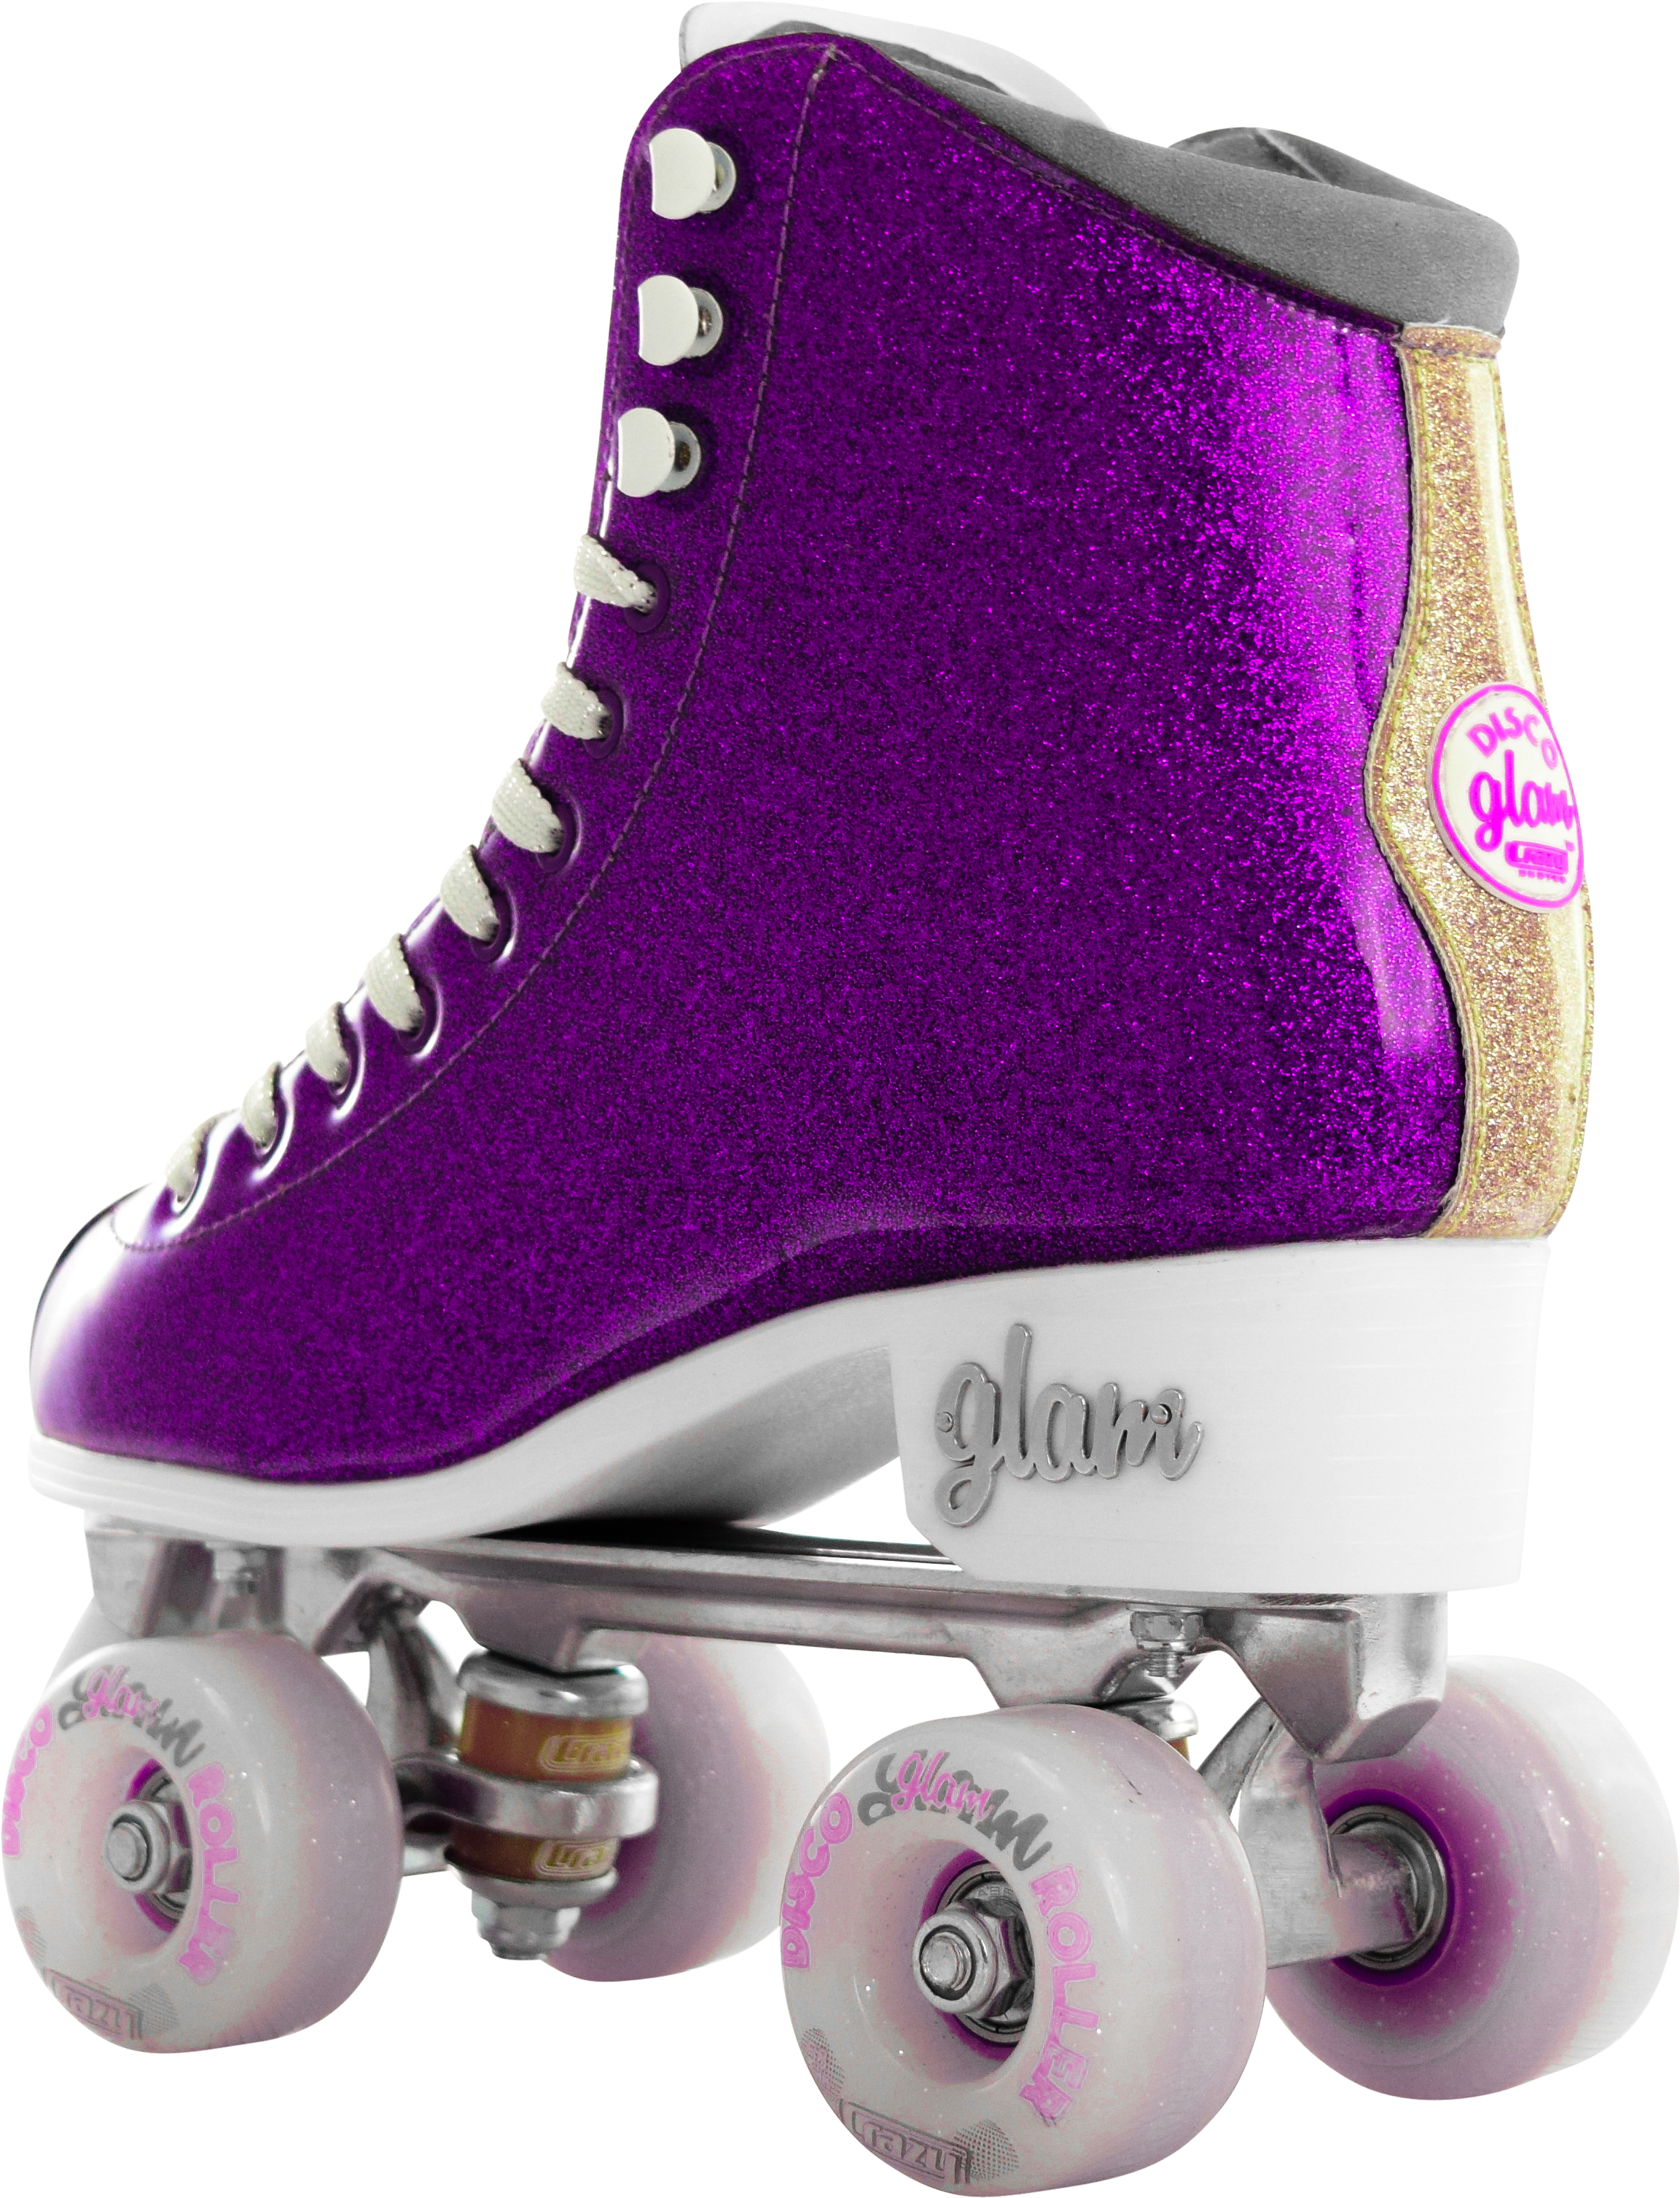 A Purple Roller Skate With White Wheels